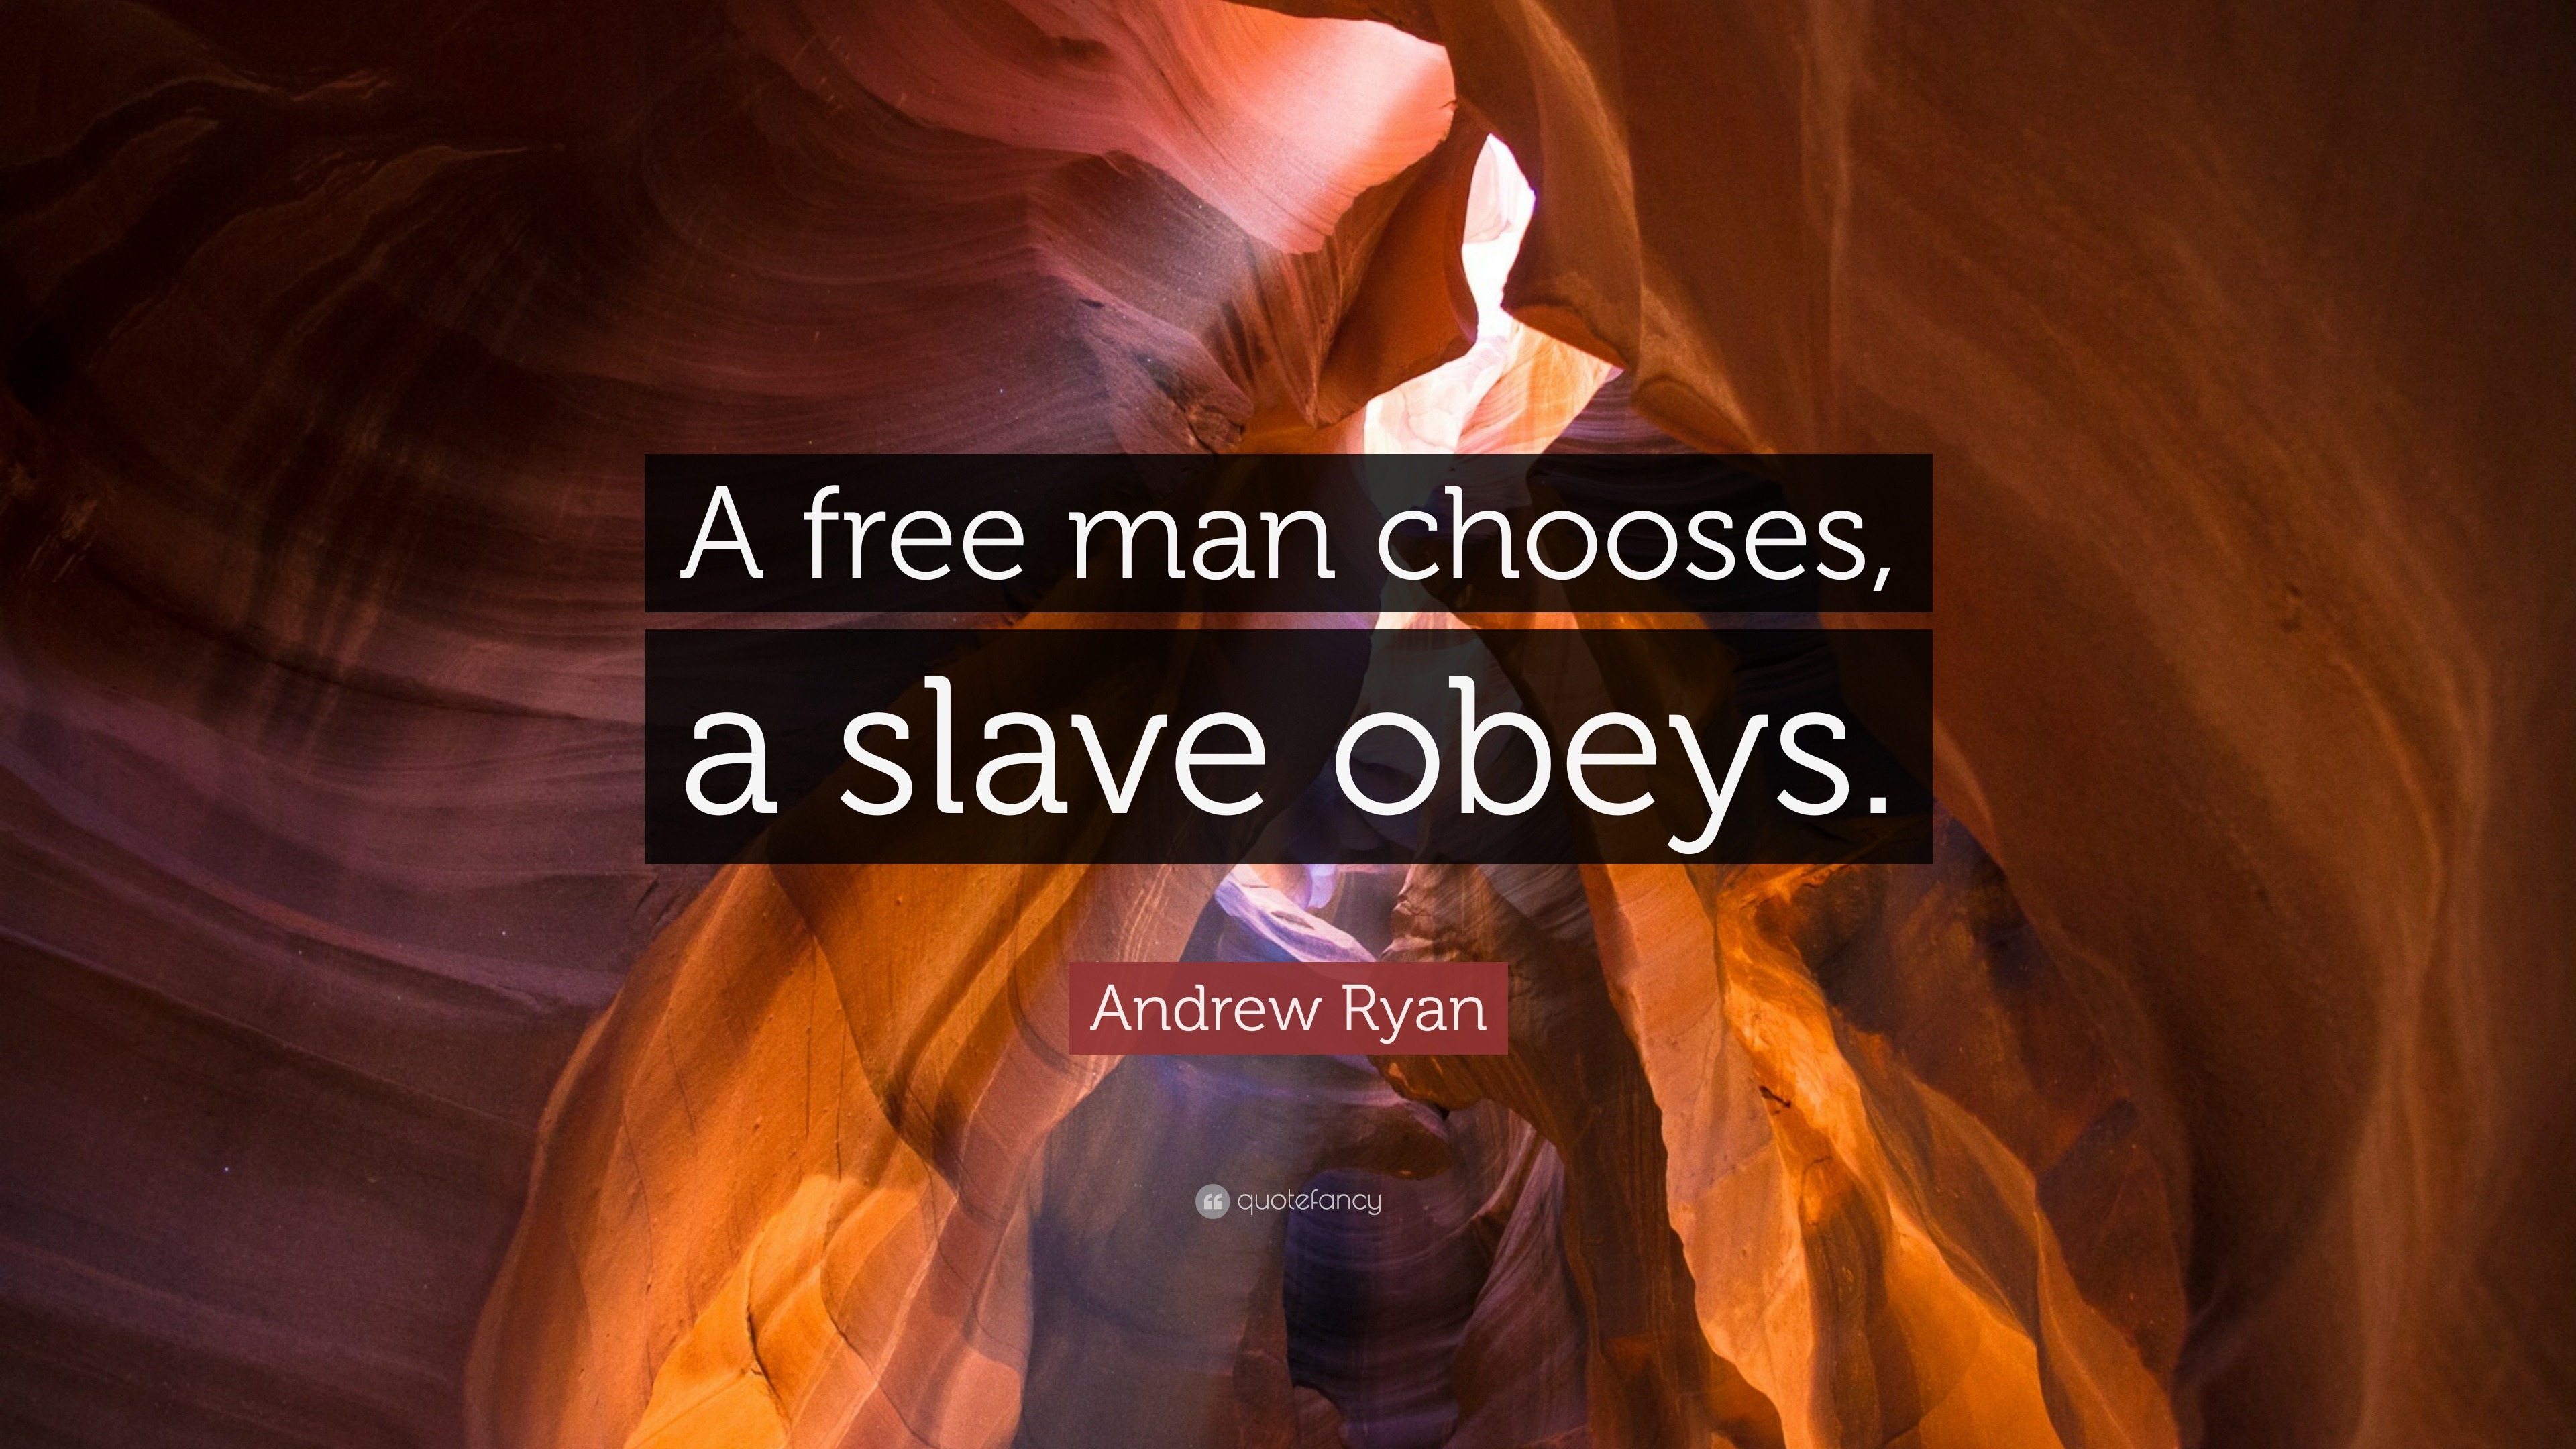 Andrew Ryan Quote: "A free man chooses, a slave obeys." (12 wallpapers) - Quotefancy